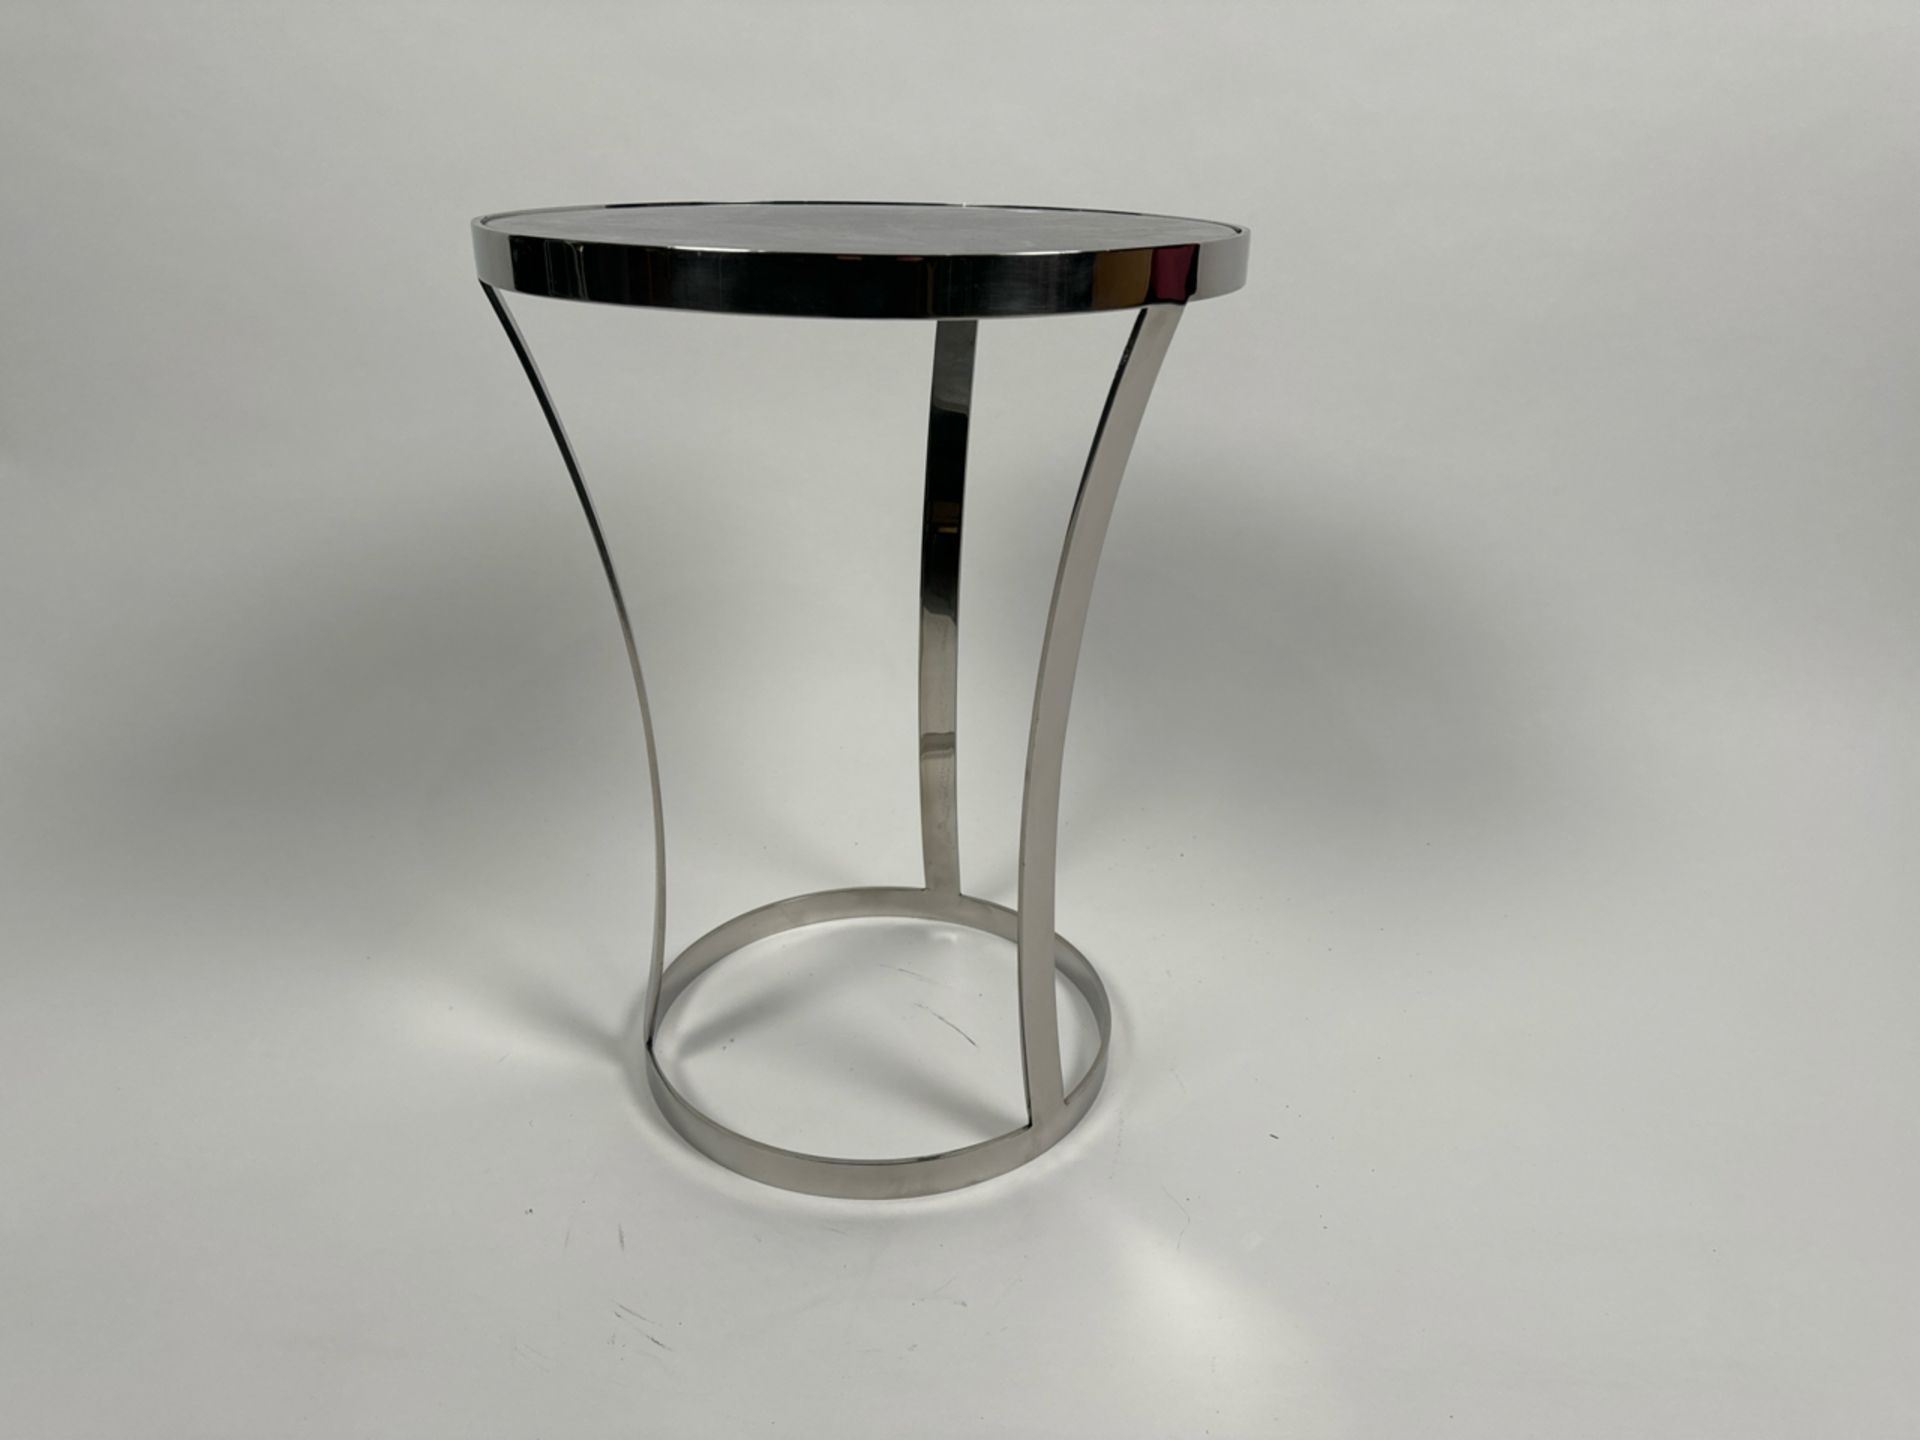 Silver Side Table With Marble Top - Image 2 of 3